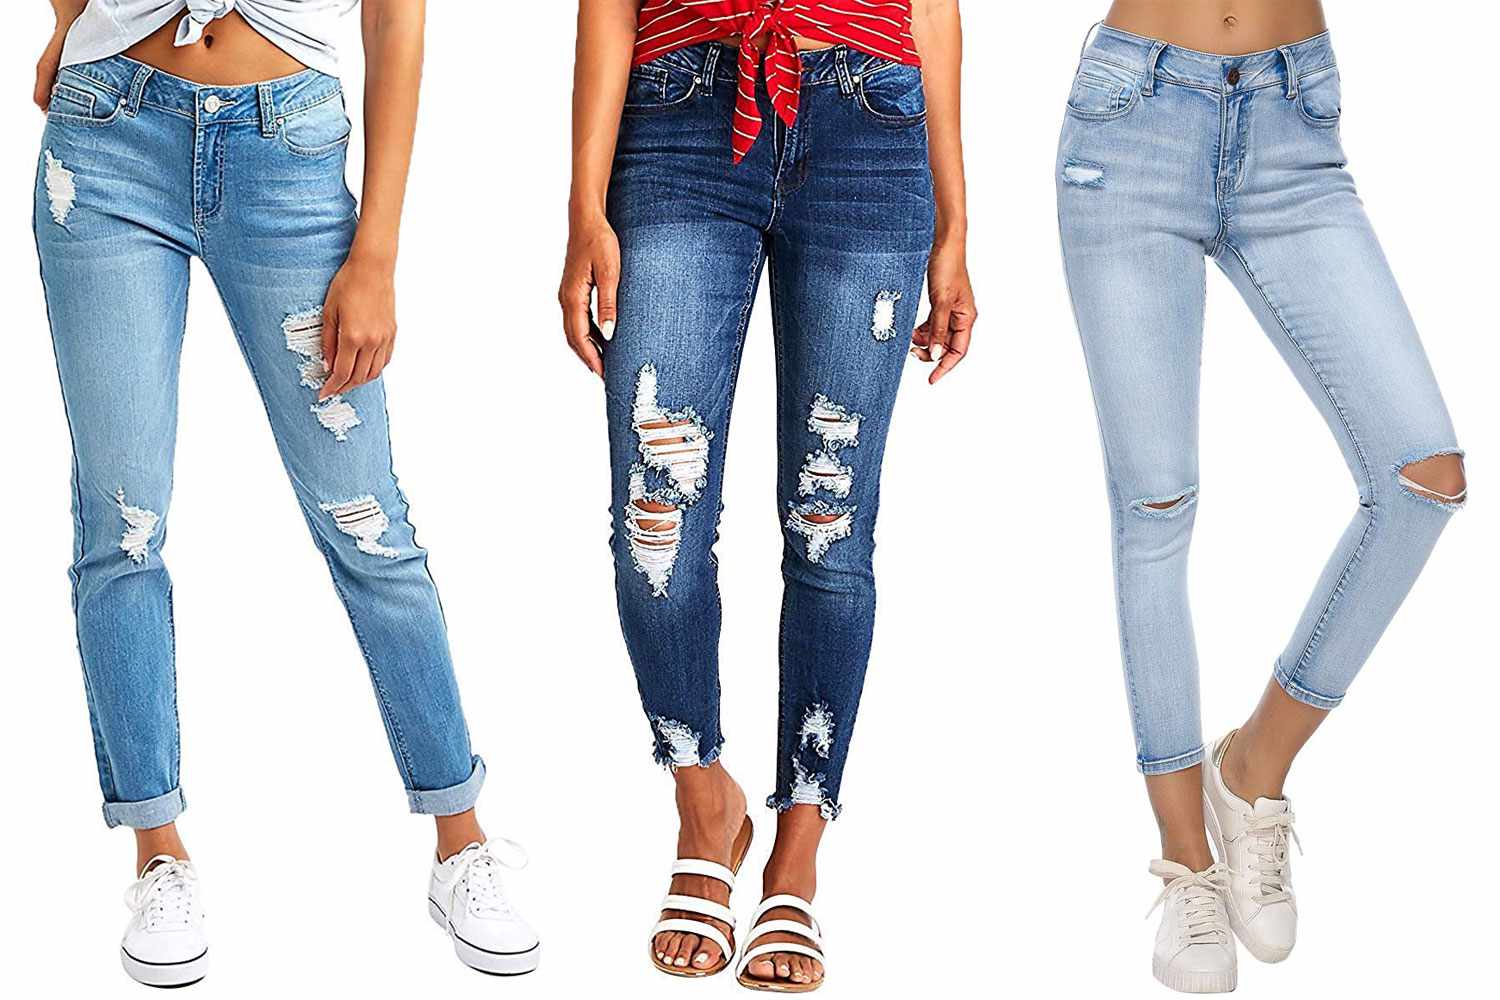 Resfeber Women's High Waisted Skinny Jeans Ripped Stretch Distressed Jeans with Holes